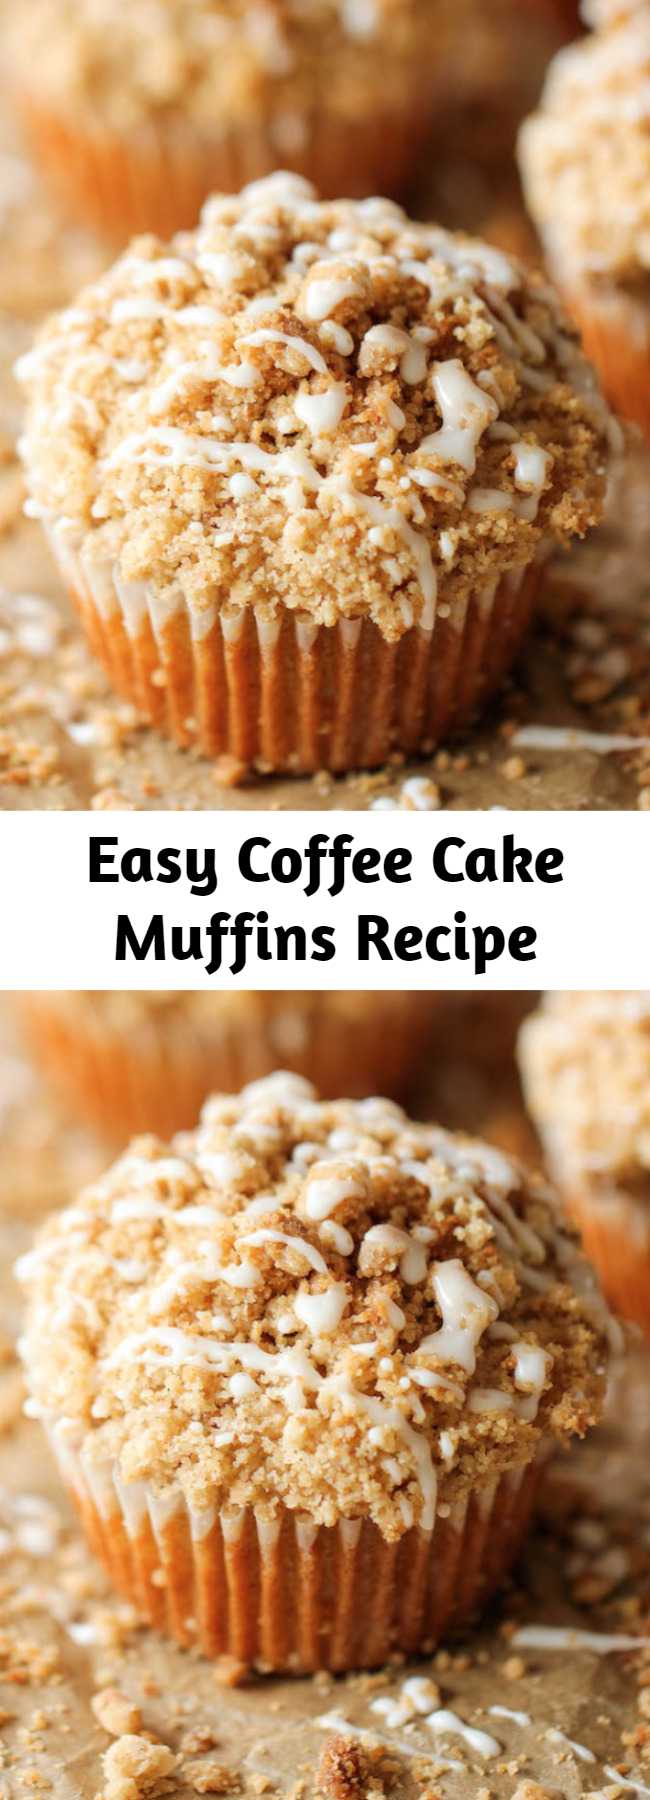 Easy Coffee Cake Muffins Recipe - The classic coffee cake is transformed into a convenient muffin, loaded with a mile-high crumb topping!